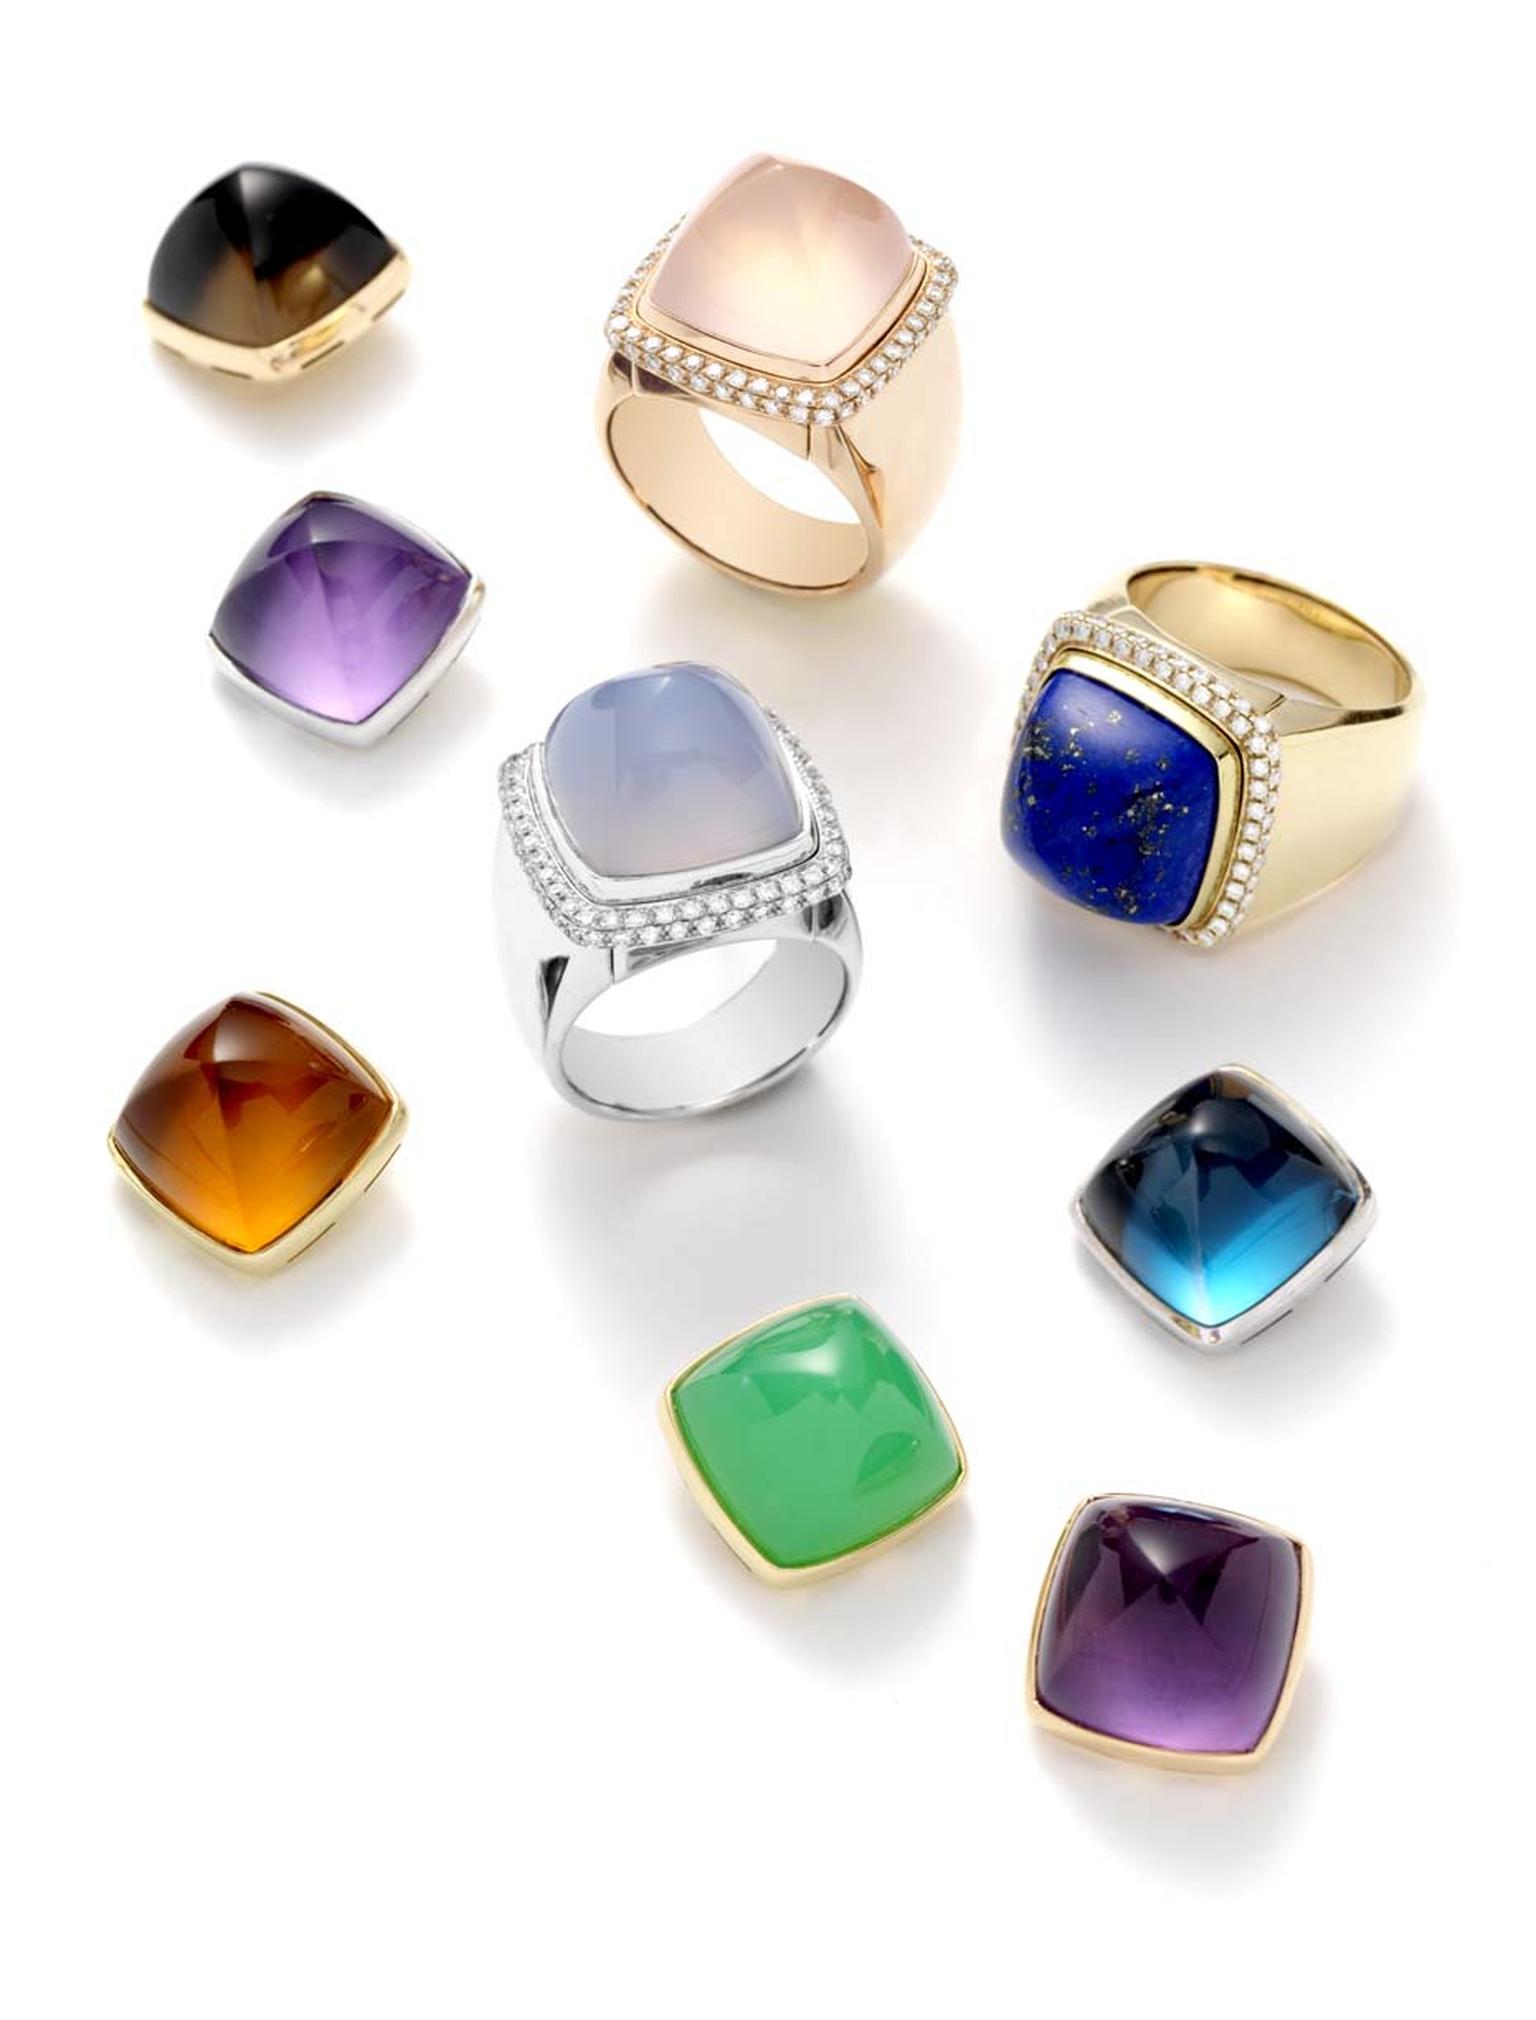 Fred Paris jewellery: switch your gemstone depending on your mood with  innovative Pain de Sucre rings